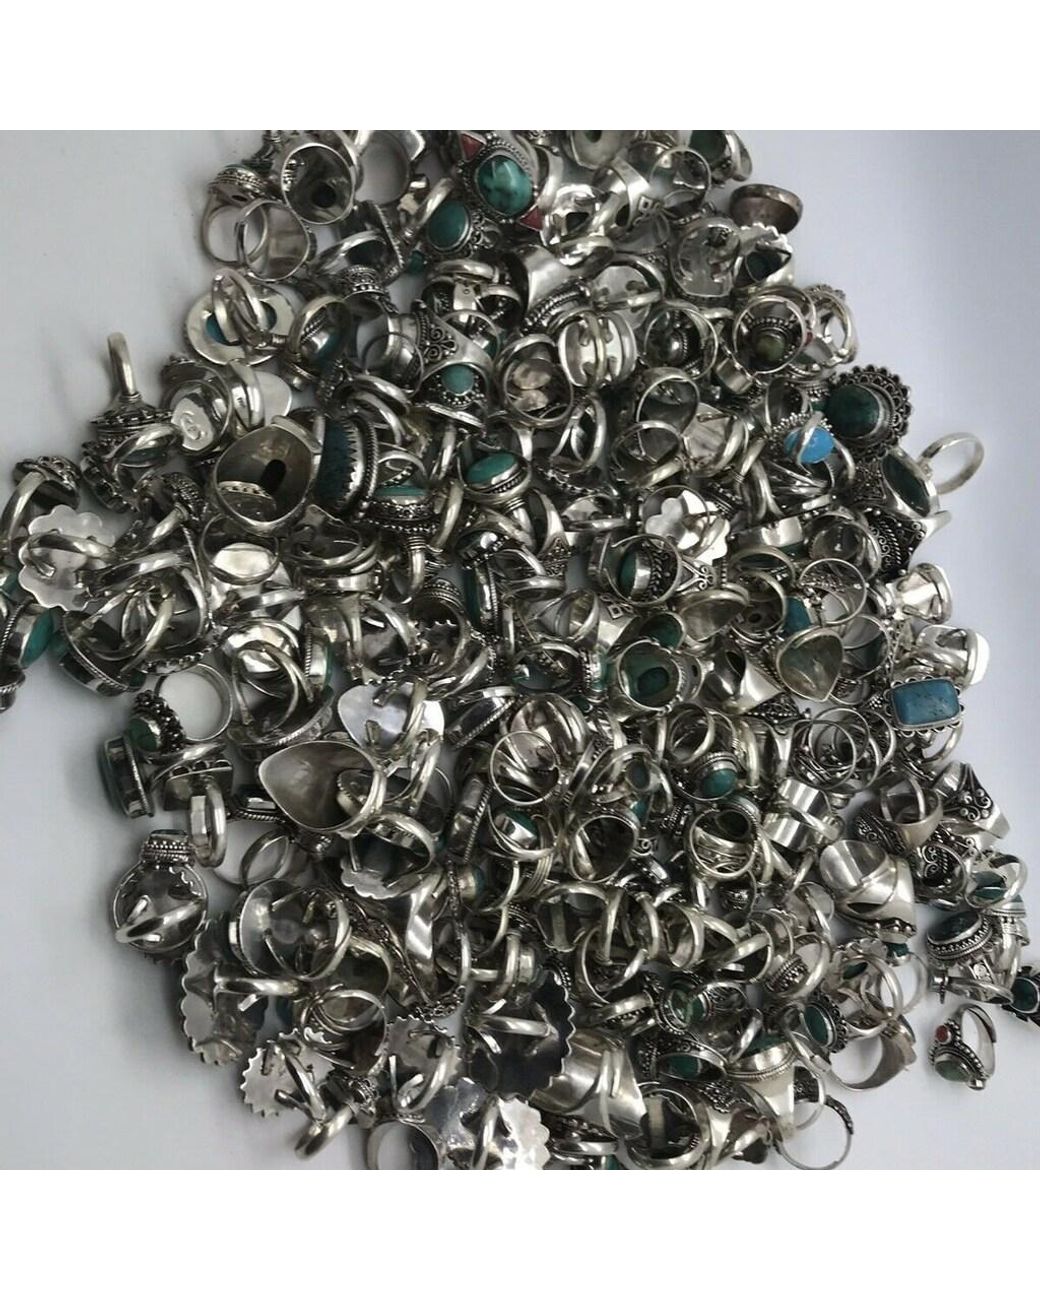 WHOLESALE 11PC 925 SOLID STERLING SILVER BLUE TURQUOISE RING LOT Q393 